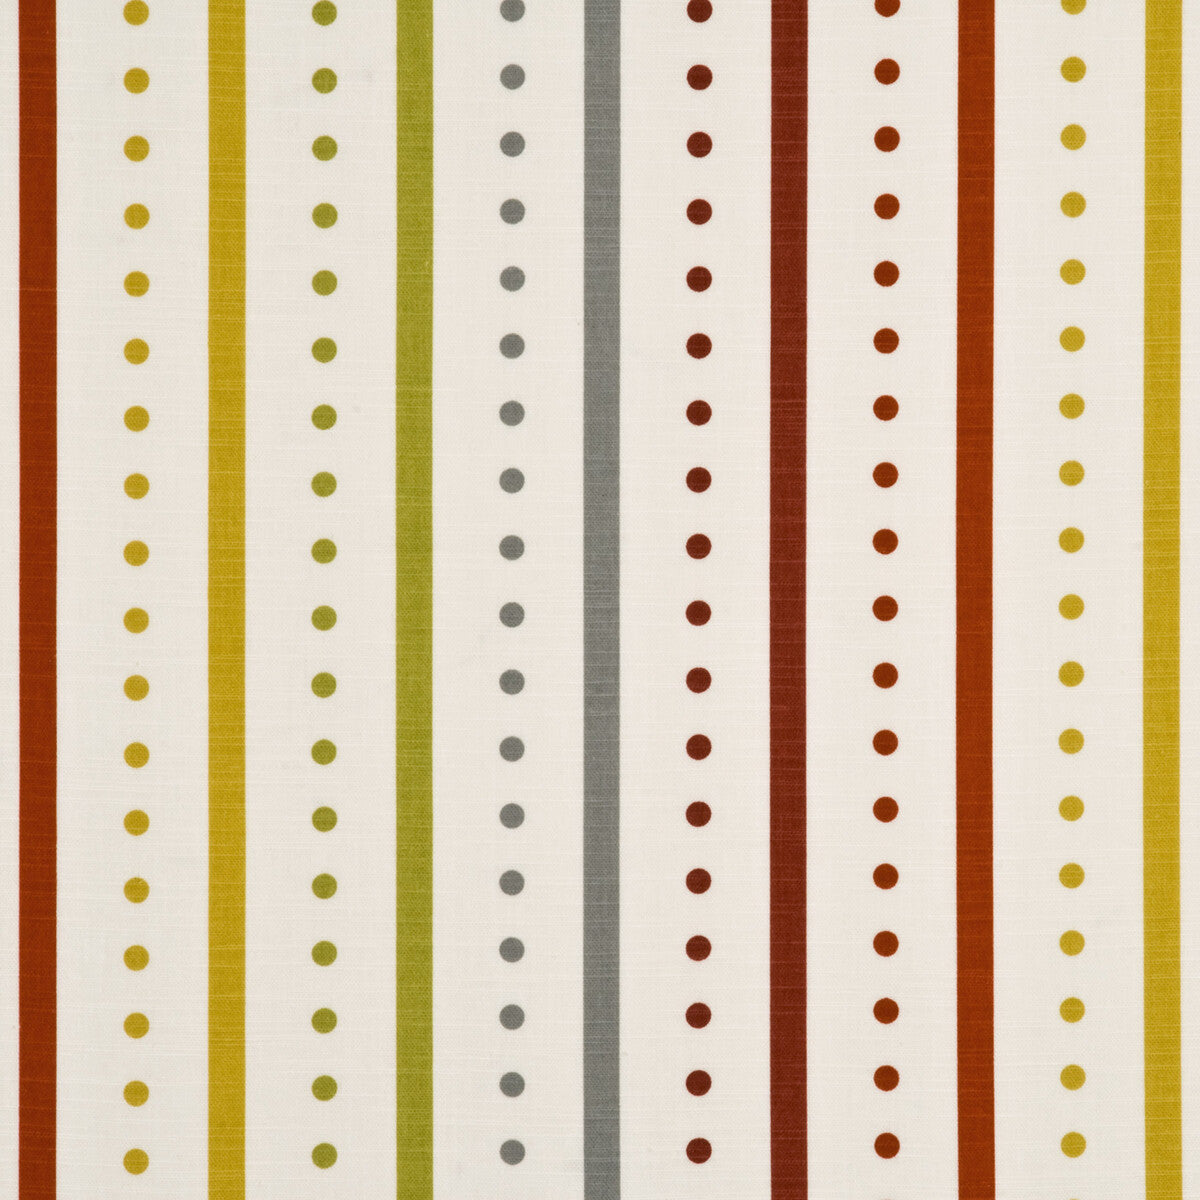 Opera Stripe fabric in red/gold color - pattern PP50344.5.0 - by Baker Lifestyle in the Opera Garden collection